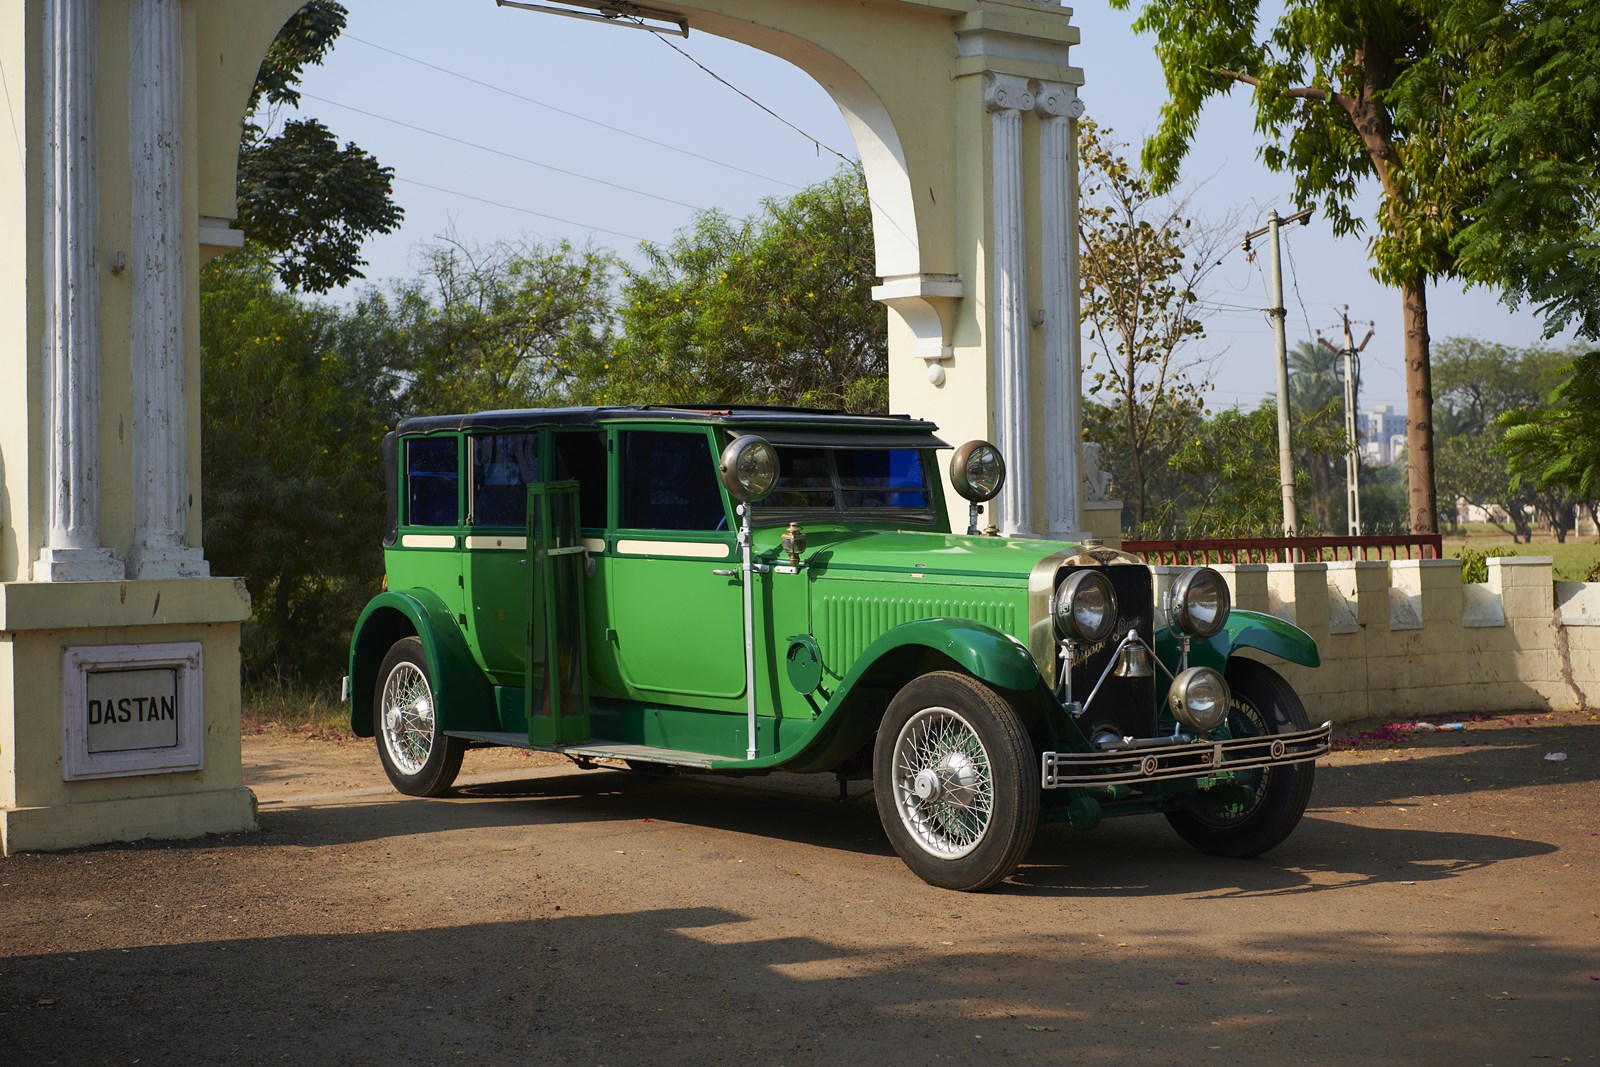 Pranlal Bhogilal historic vehicles, Pranlal Bhogilal collector India, Vintage and Classic Car Club of India (VCCCI) founder, Pranlal Bhogilal Auto World Vintage Car Museum